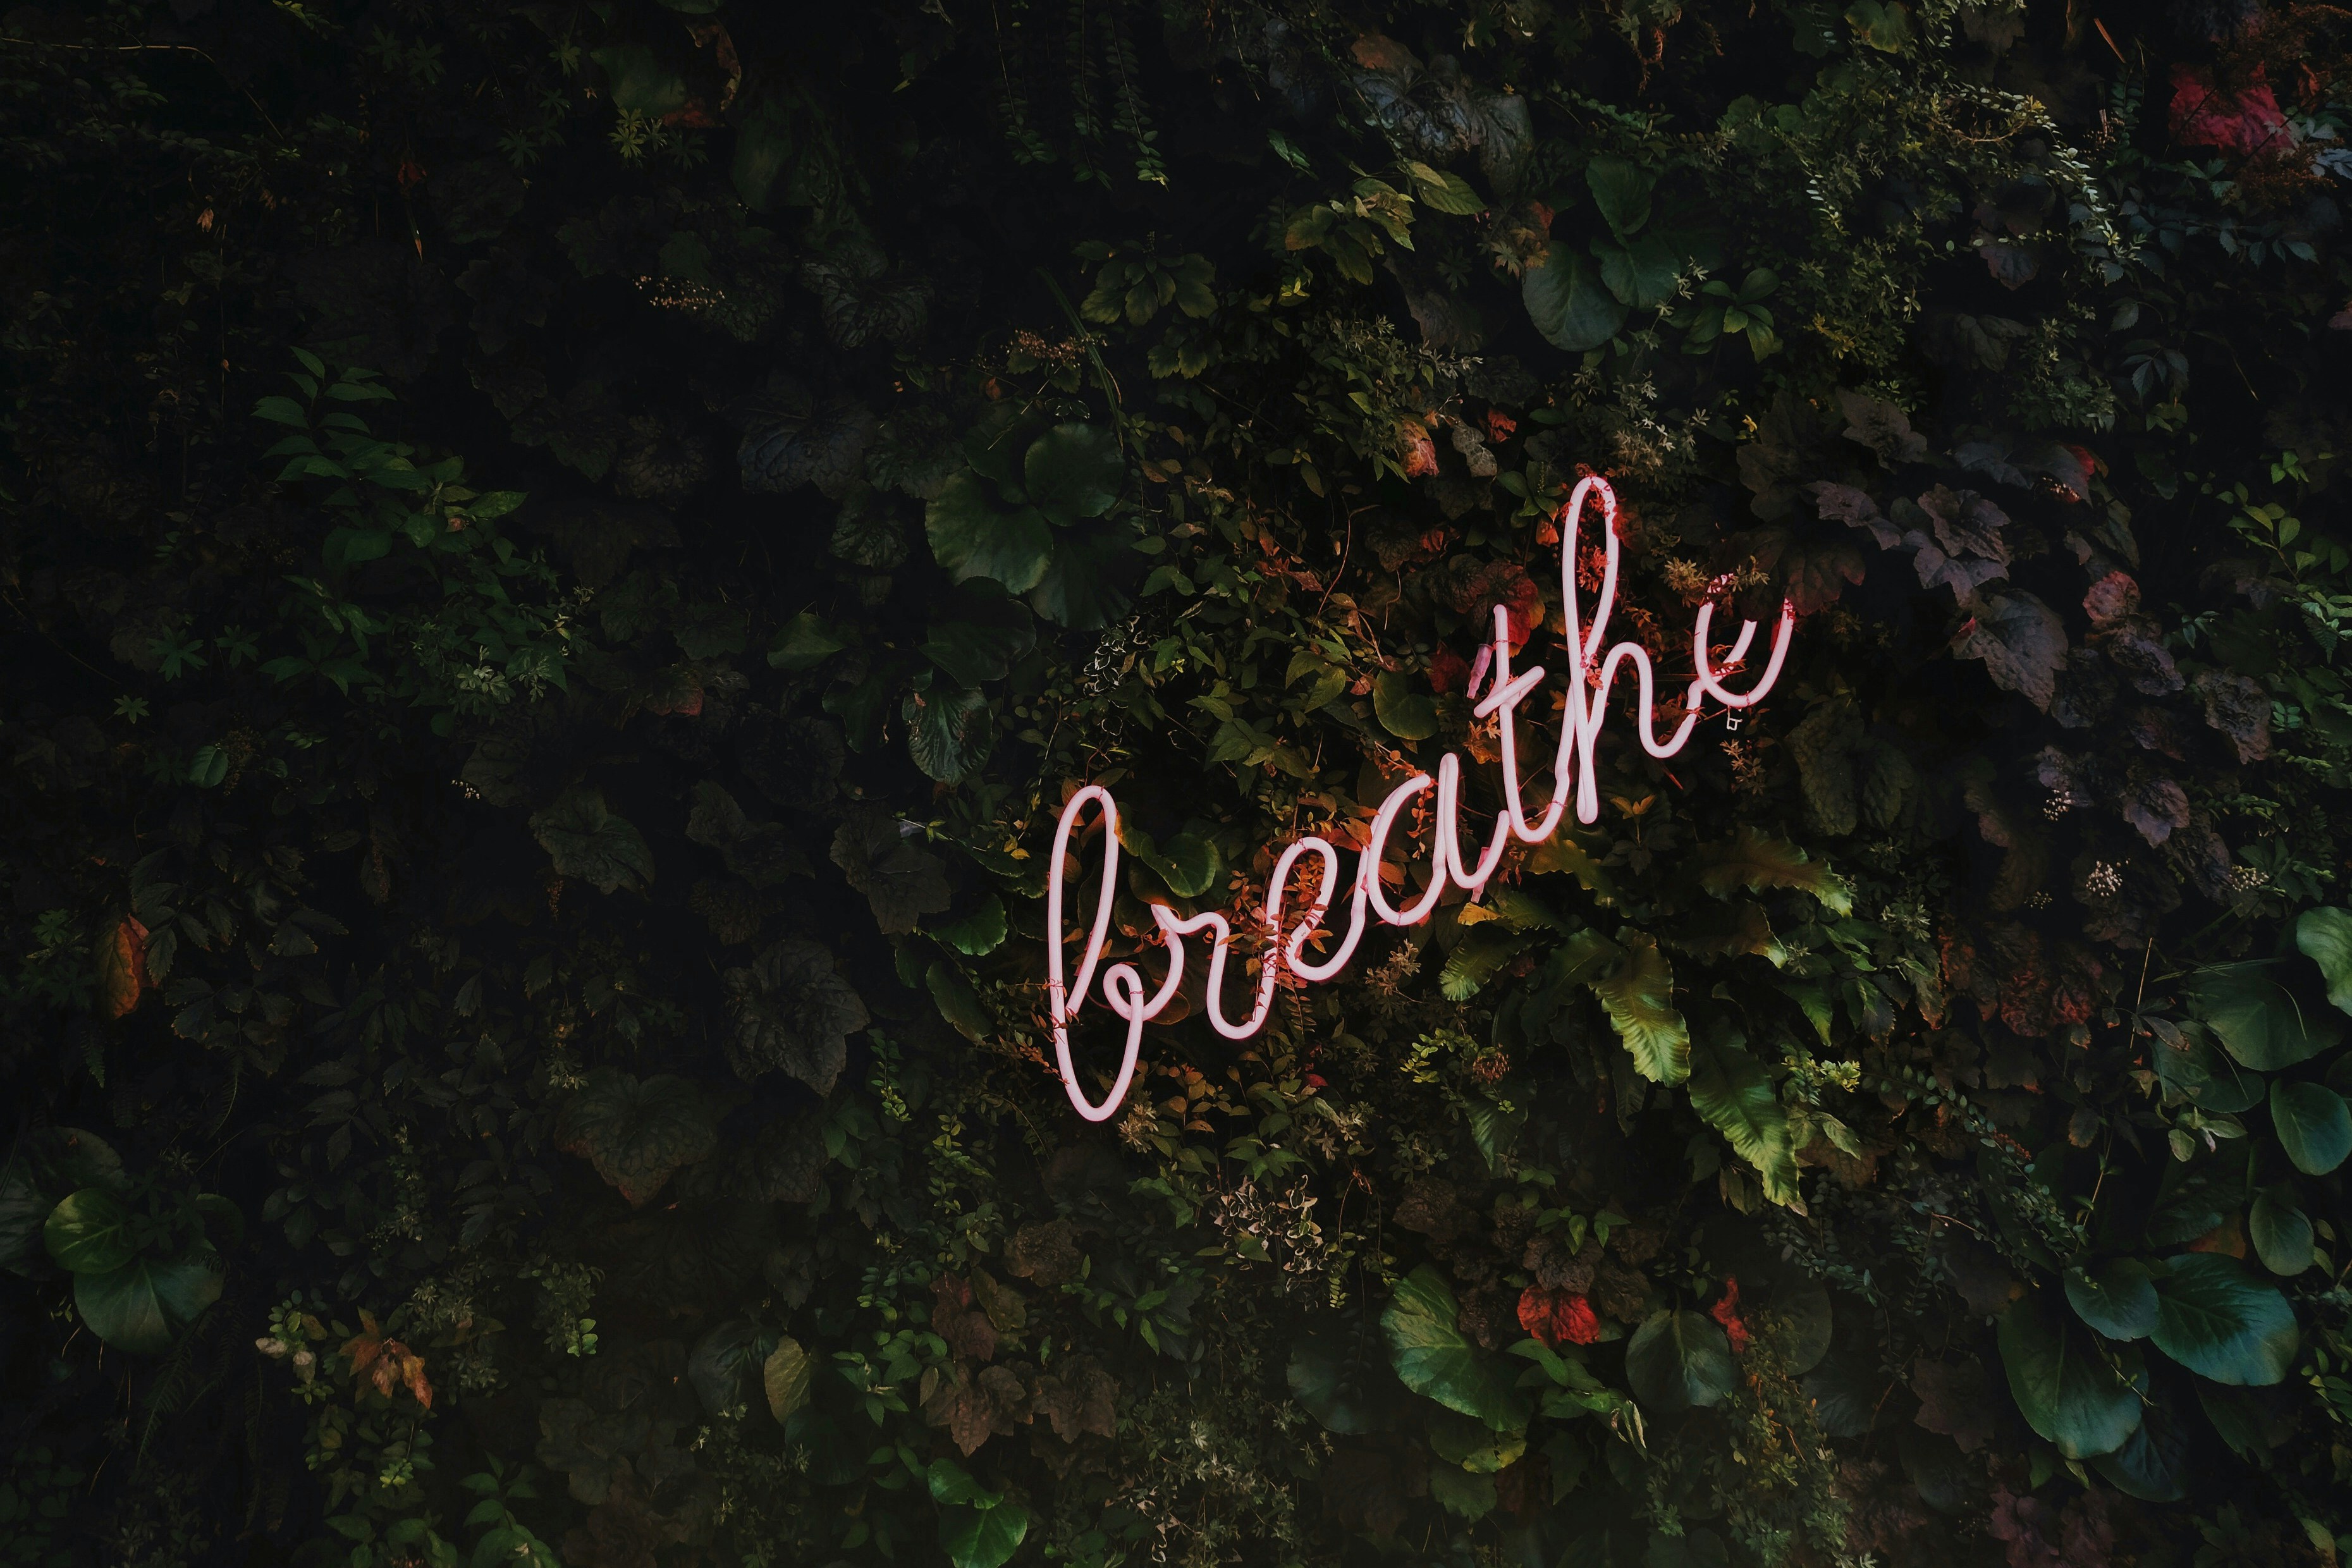 …breathe!</p>
<p>For a full size digital copy (6000x4000px RAW+JPG) of this file, or a high quality print, please contact me via instagram: @timothy.j.goedhart, or email: tim@goedhart-lin.nl</p>
<p>That file would be free to use for any means except direct reselling (copywrite is included in metadata).</p>
<p>When using this free image online: please tag, credit and if you want, follow me on Instagram.” style=”max-width:400px;float:right;padding:10px 0px 10px 10px;border:0px;”>Best Buy Open Box Return: A Shopper’s Guide to Finding the Perfect Deal</p>
<p>Are you someone who loves getting the best deals on electronics and gadgets? Do you enjoy the thrill of finding top-notch products at discounted prices? If so, then Best Buy’s Open Box Return section is an absolute goldmine for you! In this article, we will delve into the world of Best Buy Open Box Returns and explore why they are the ultimate destination for savvy shoppers. So buckle up and get ready to embark on a journey filled with excitement and incredible savings!</p>
<p>1. What are Best Buy Open Box Returns?</p>
<p>Before we dive deeper into the wonders of Best Buy Open Box Returns, let’s first understand what they actually are. When a customer returns a product to Best Buy, for any reason at all, that item becomes an Open Box Return. These products may have been used briefly or not at all, but they cannot be sold as brand new due to their packaging being opened or damaged.</p>
<p>2. The Appeal of Best Buy Open Box Returns</p>
<p>Now, you might be wondering why anyone would want to buy an Open Box Return when they can purchase a brand new product instead. Well, here’s where the magic lies – these items come at significantly reduced prices! You can save a substantial amount of money while still enjoying top-quality products. It’s like hitting two birds with one stone – getting your dream gadget and saving some serious cash!</p>
<div style=